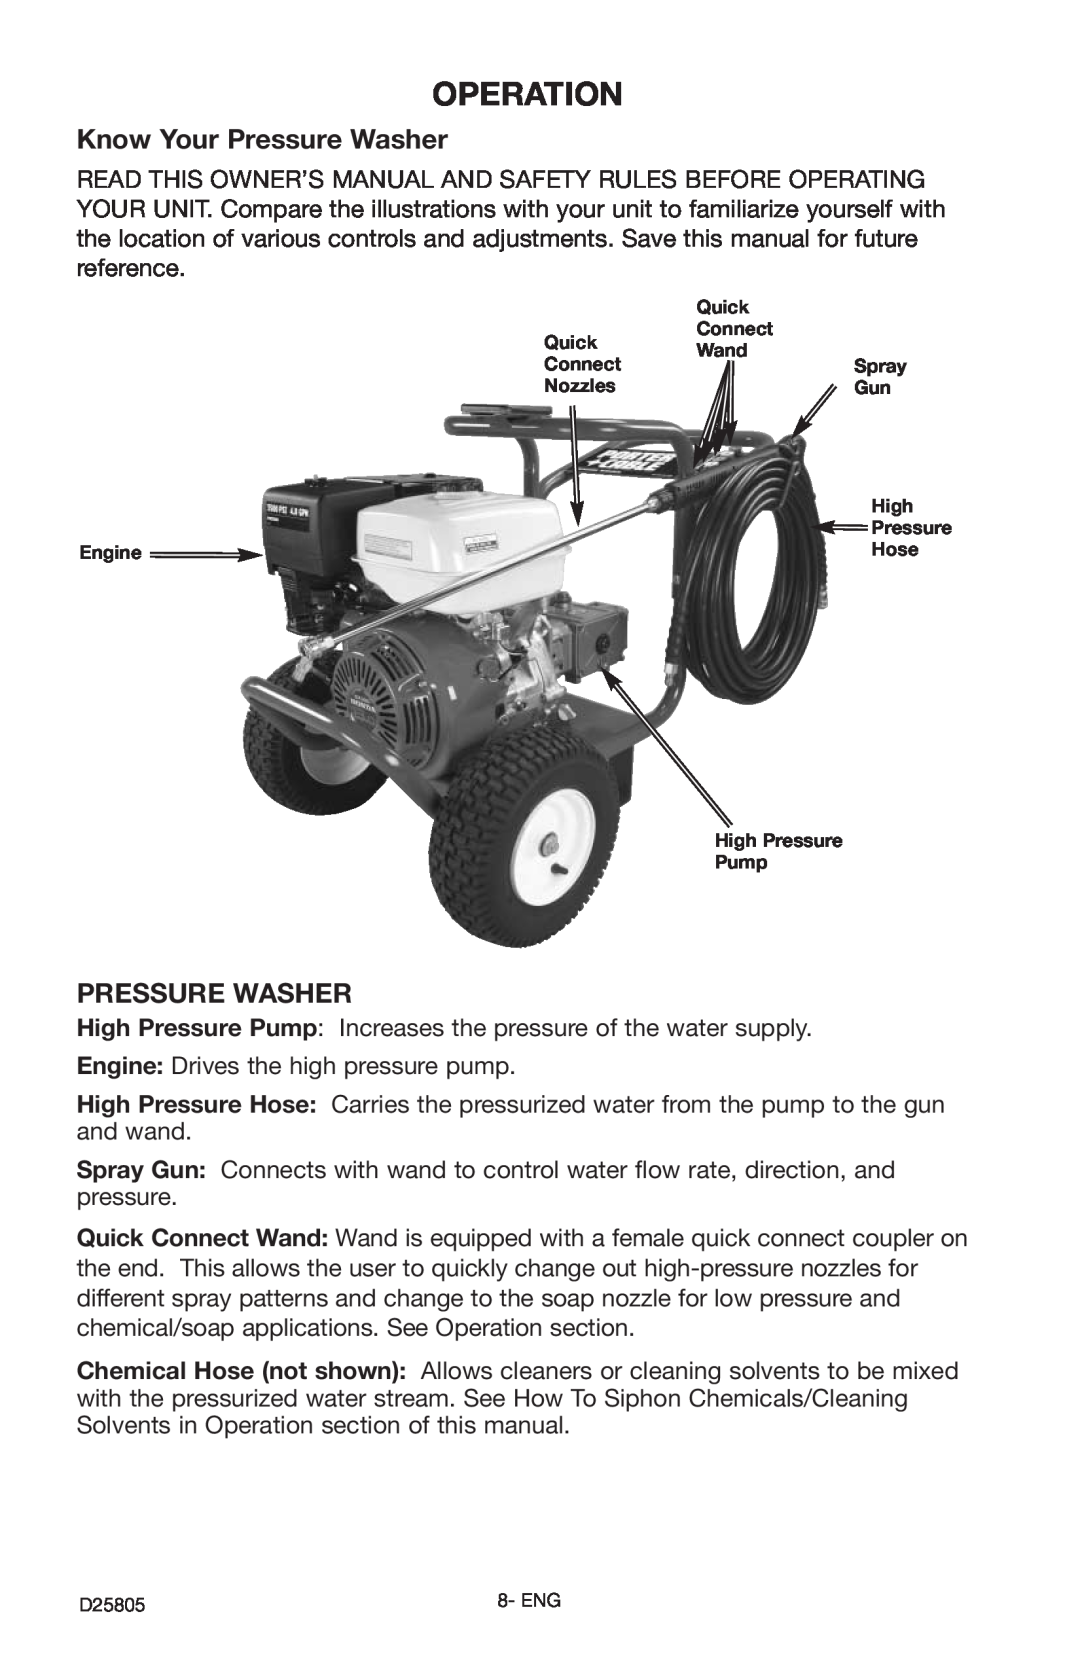 Porter-Cable D25805-025-1, PCH3500C instruction manual Operation, Know Your Pressure Washer 